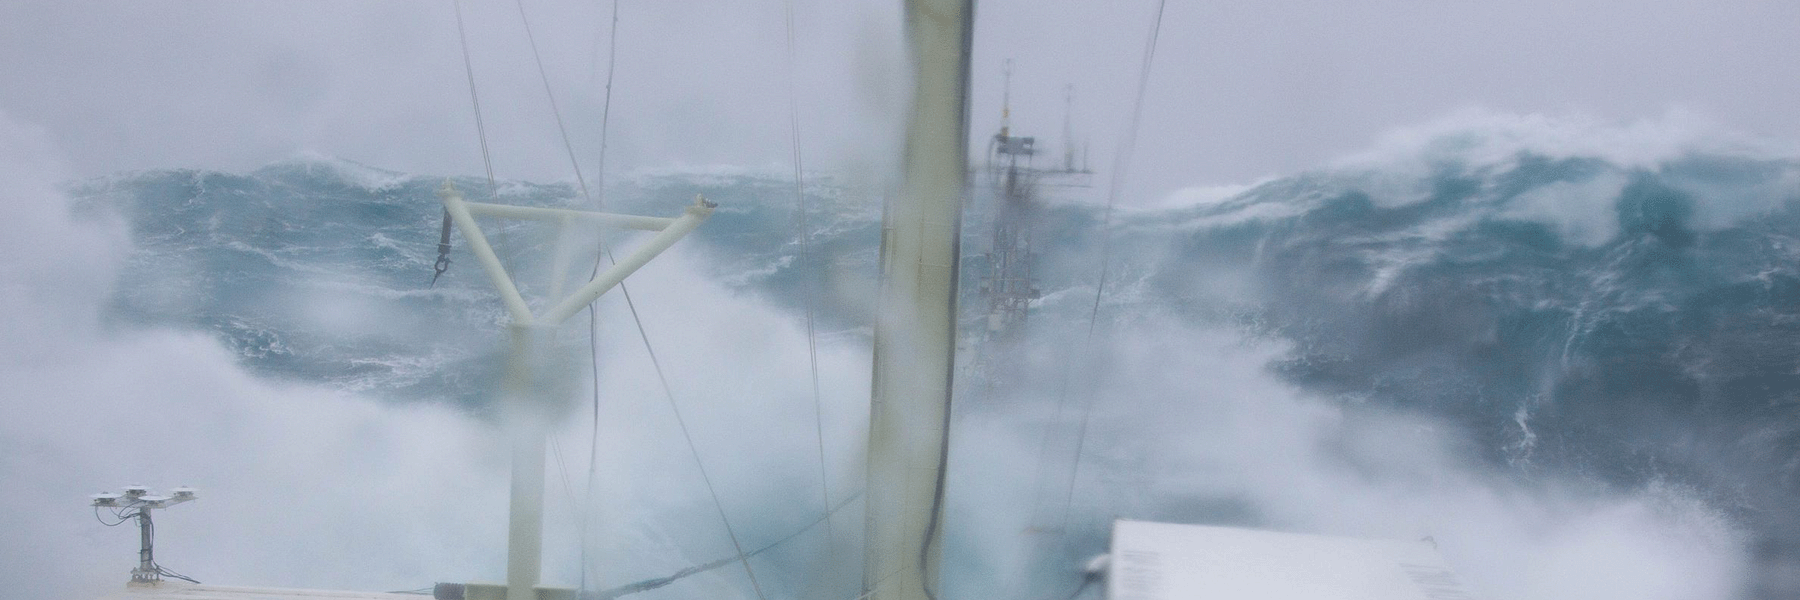 A view from the bridge of the R/V Knorr during a storm.